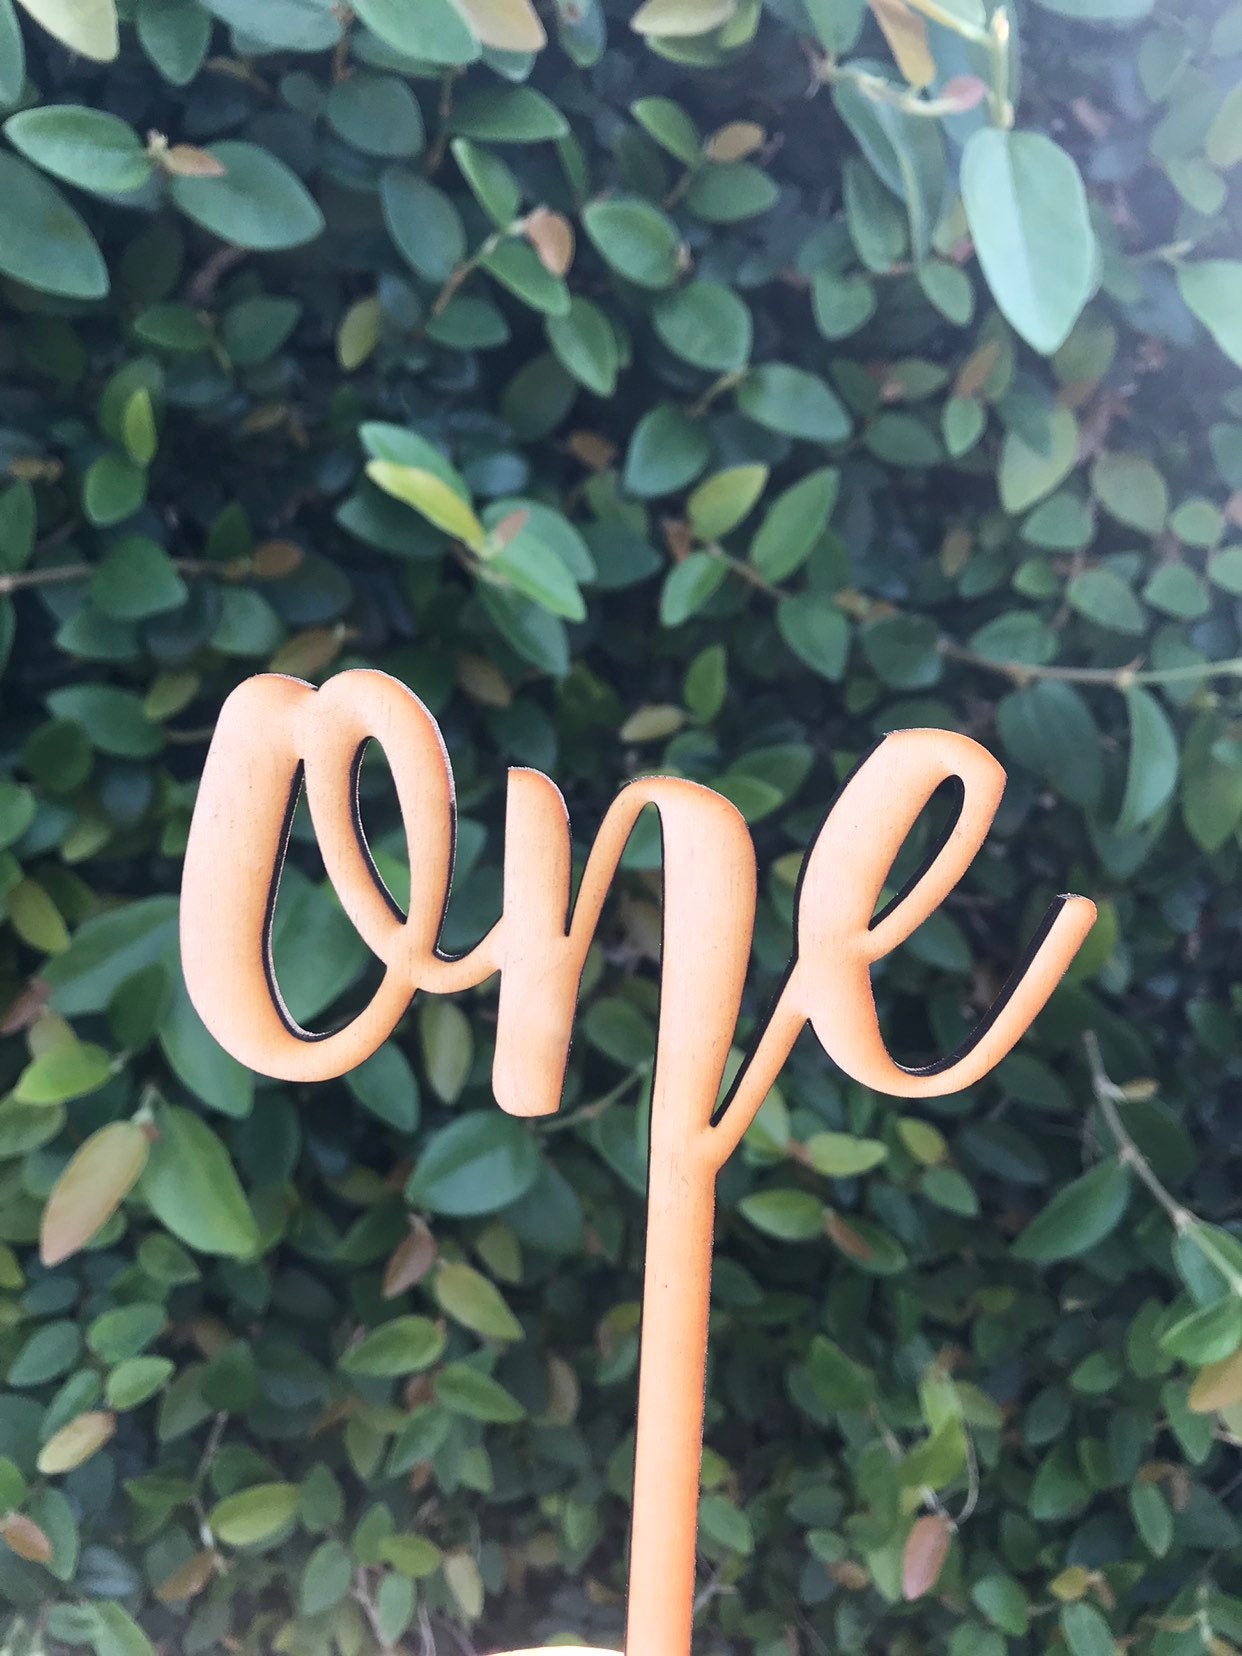 One Cake Topper